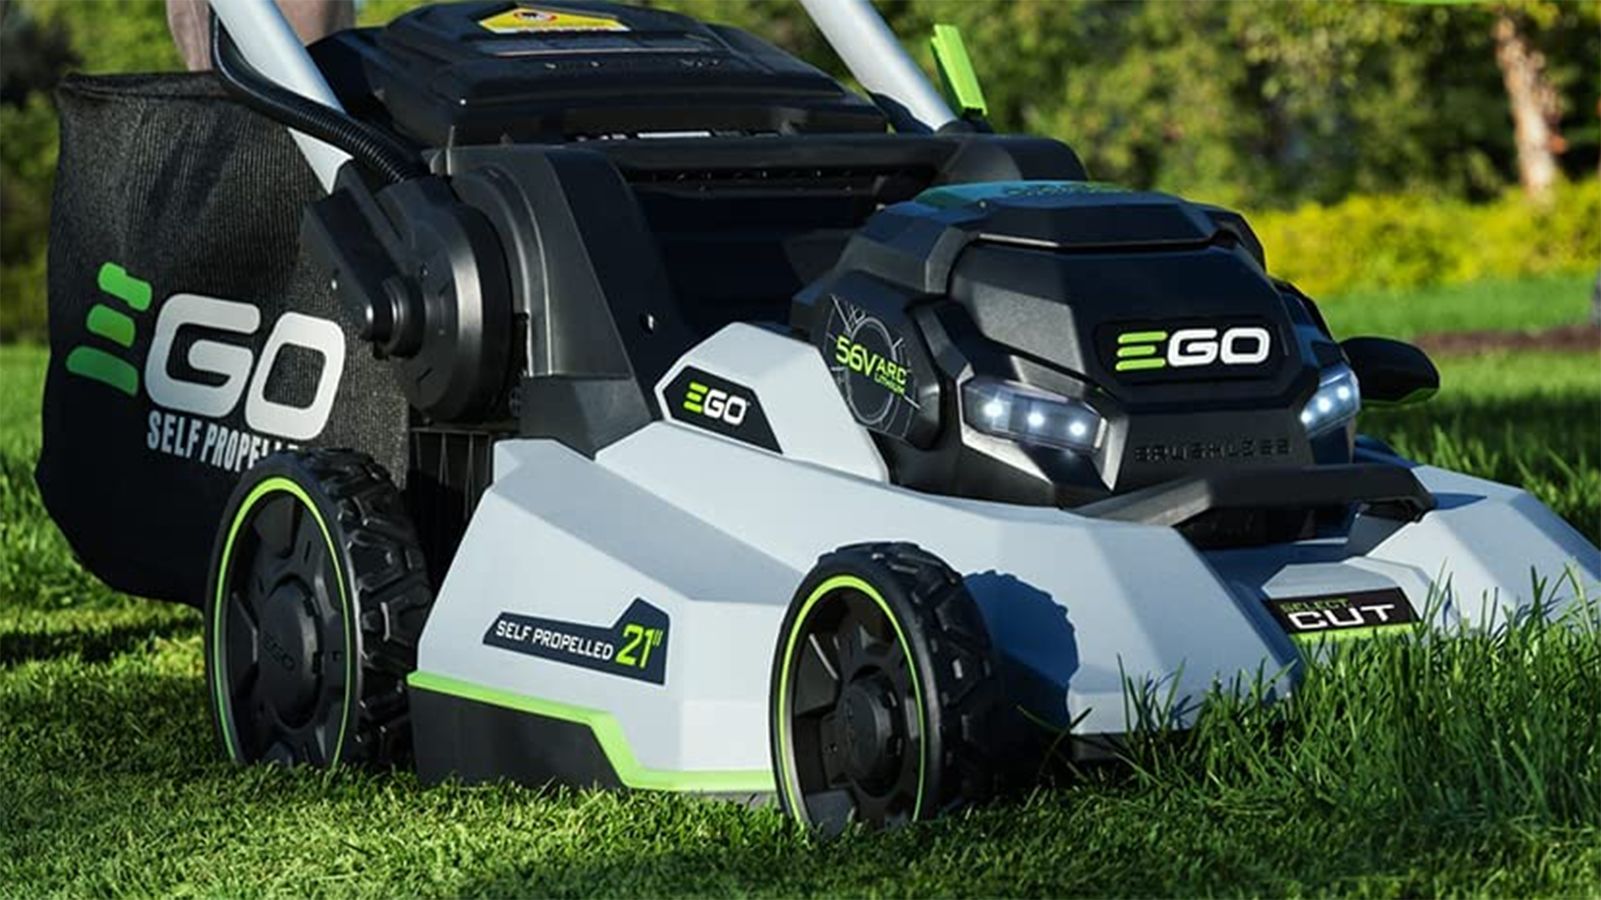 Buying a Lawn Mower: Which Is Best? Electric, Gas, or Battery? - Dengarden